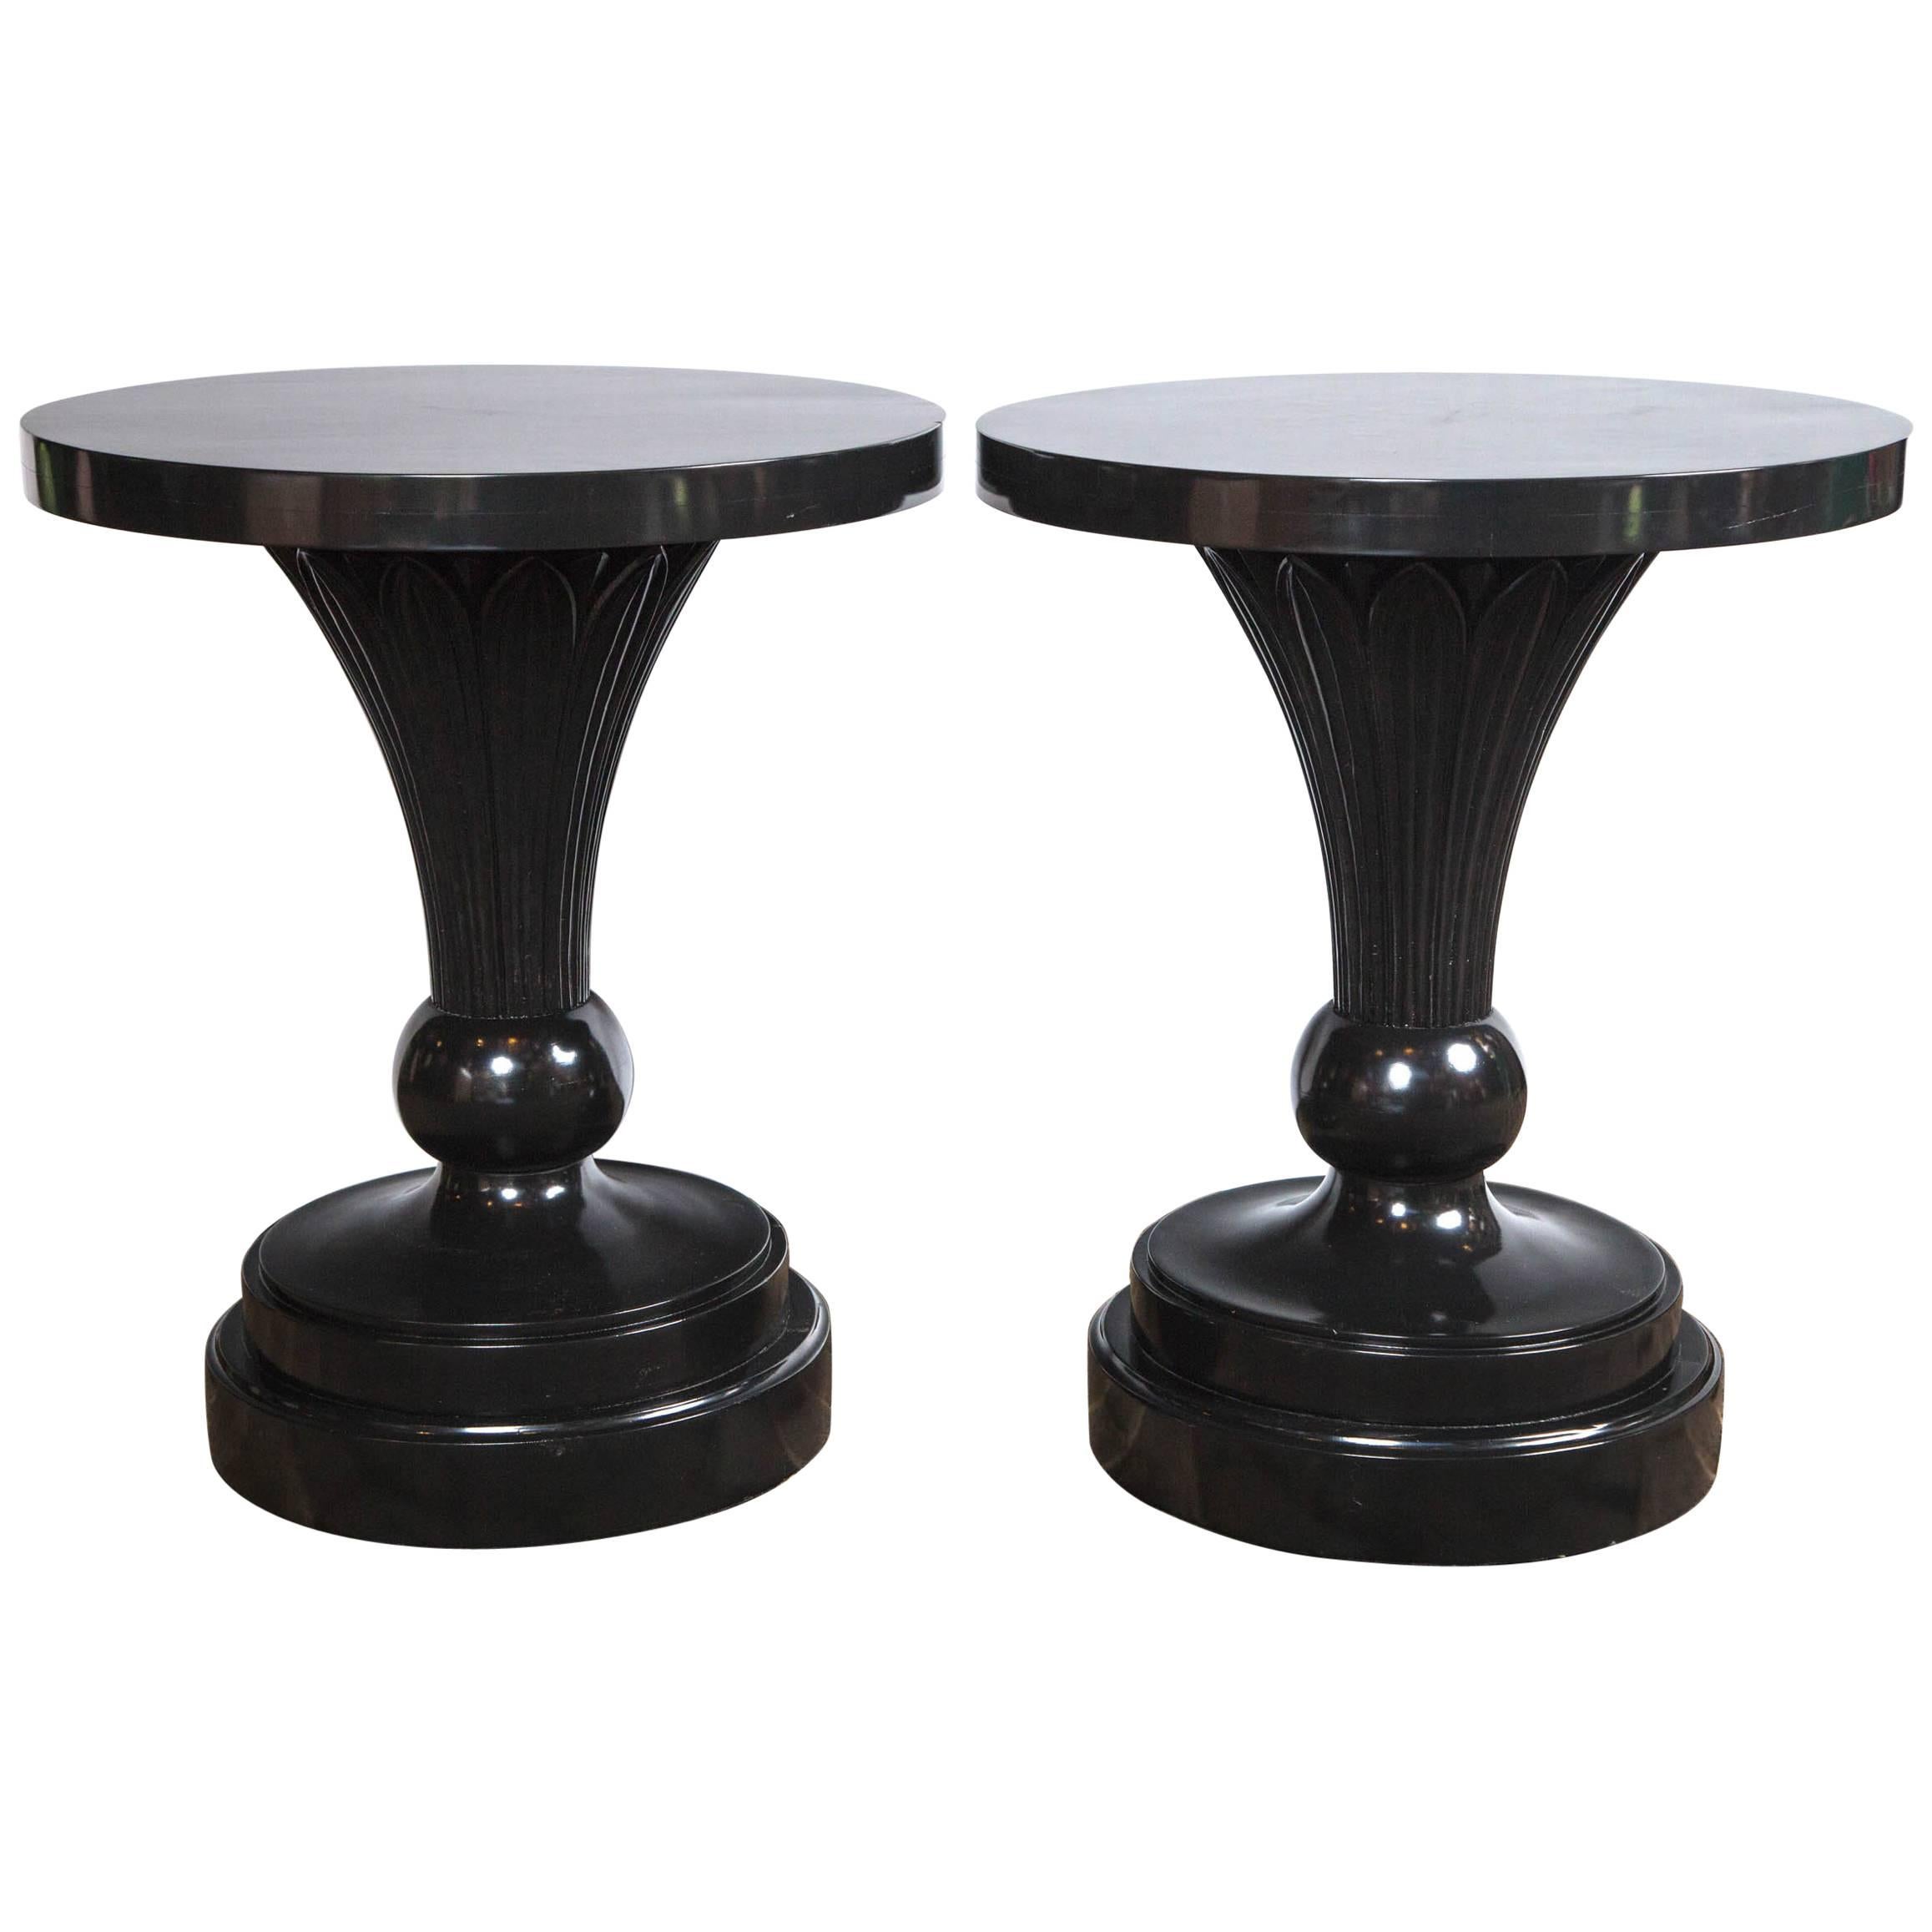 Authentic Dorothy Draper Pair of Tables Custom-Made for the Greenbrier Resort For Sale